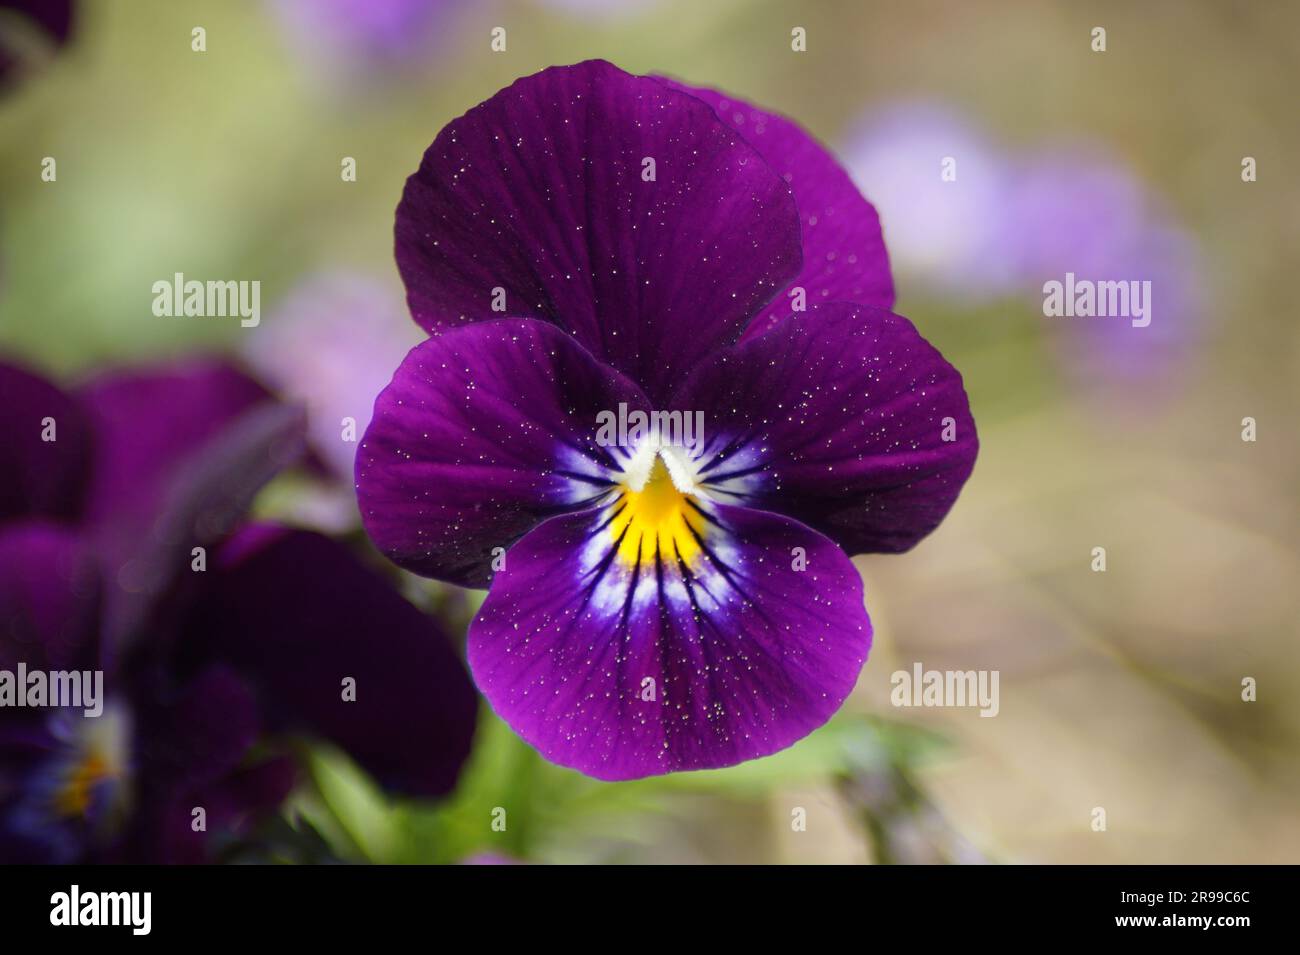 Purple flower of a horned violet Stock Photo